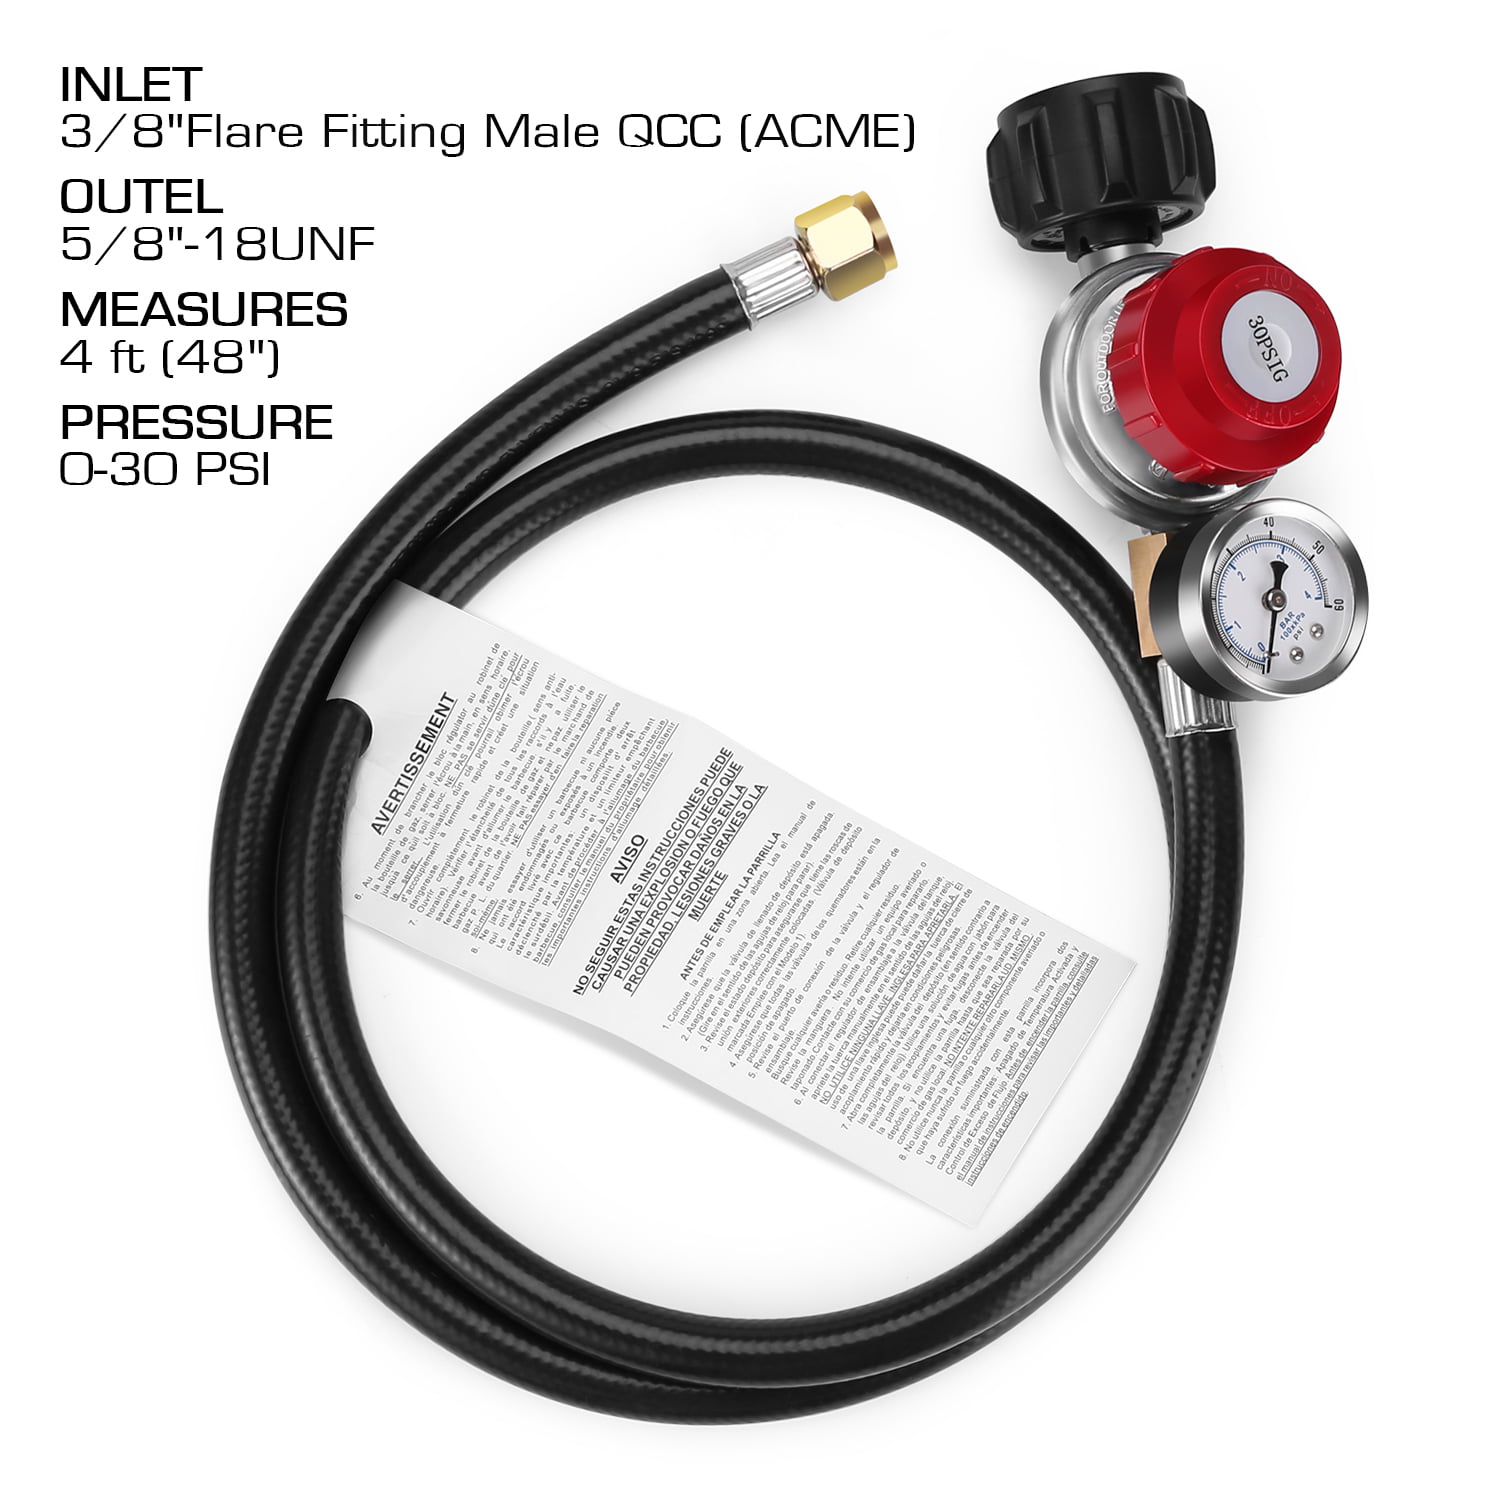 Stainless Steel Braided High Pressure Propane Regulator for Fire Pit Gas Cooker Grill GASPRO 5Ft 0-30 PSI Adjustable Propane Regulator Hose with Gauge Forge QCC1 x 3/8 Female Flare Connection